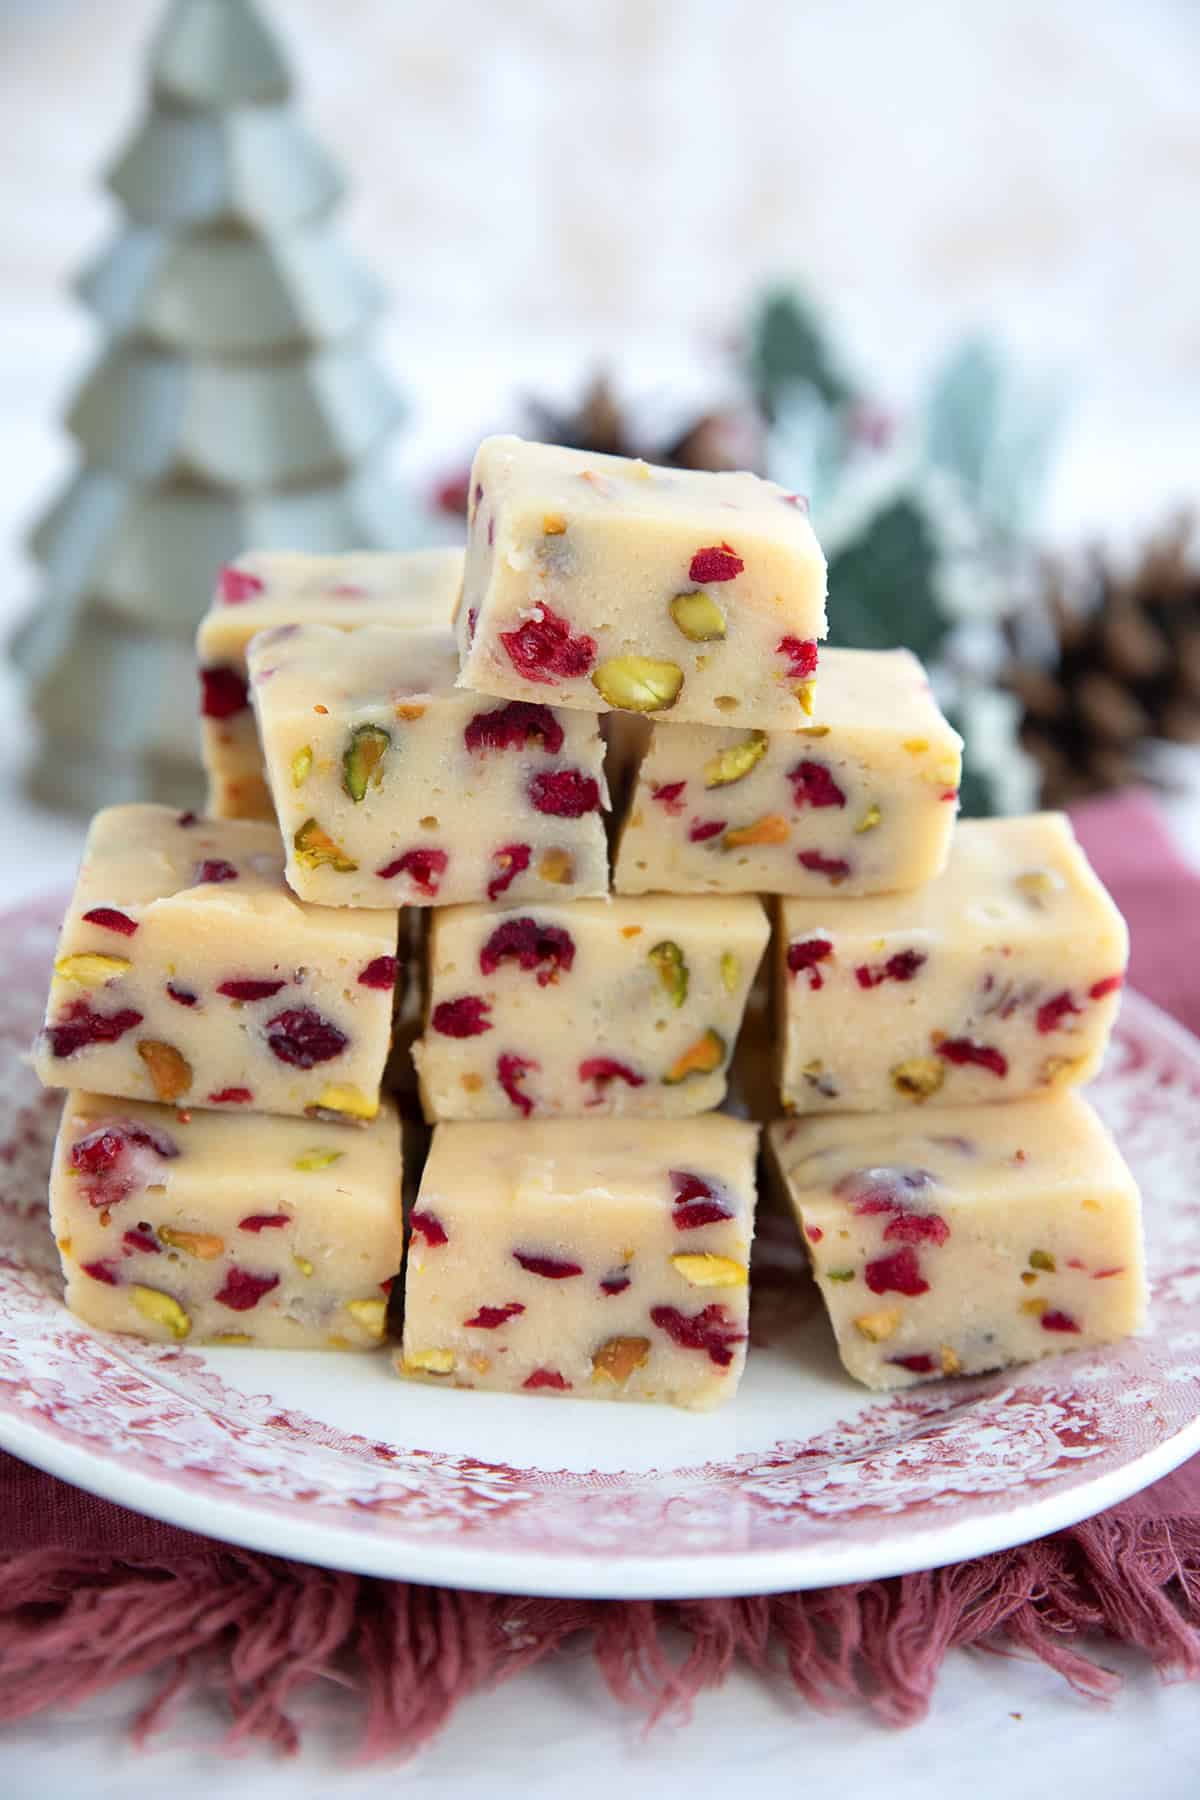 Keto White Chocolate Fudge with cranberries and pistachios piled up on a red patterned plate.